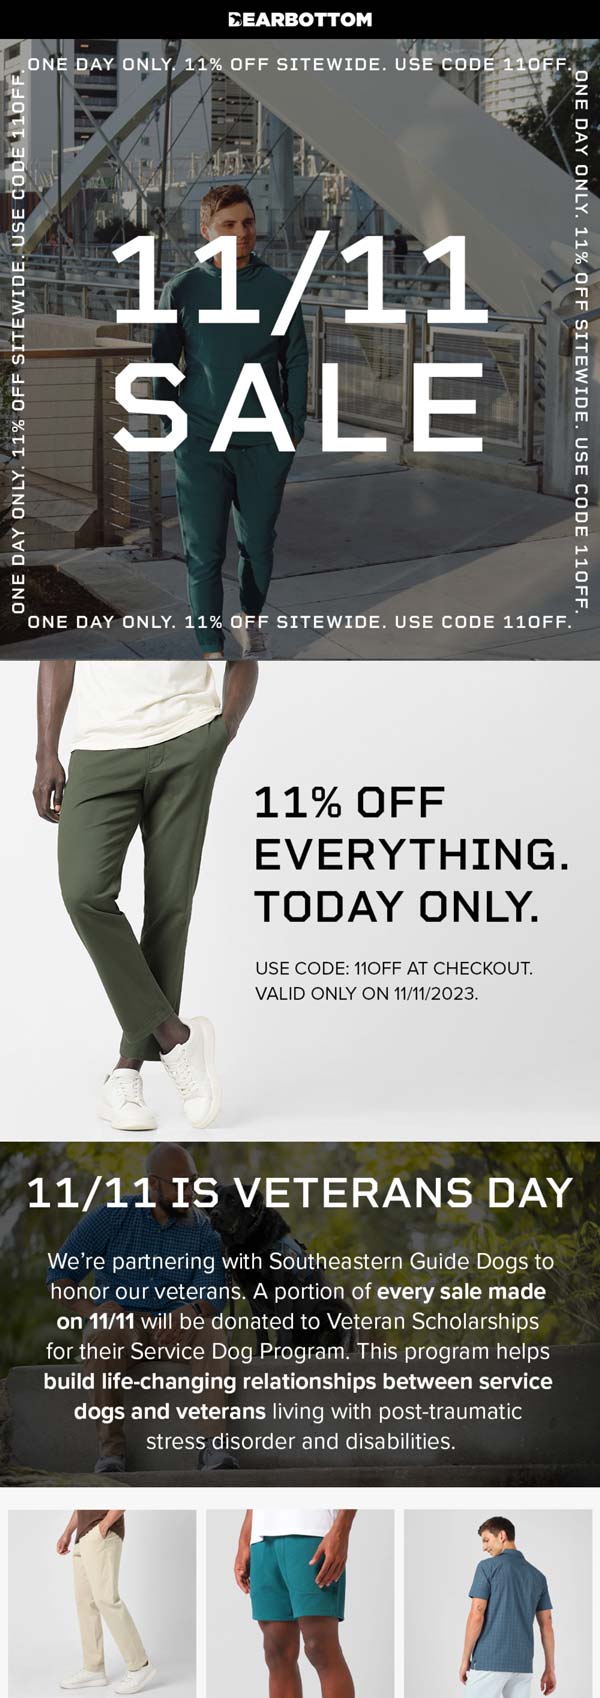 Bearbottom stores Coupon  11% off today at Bearbottom via promo code 11OFF #bearbottom 